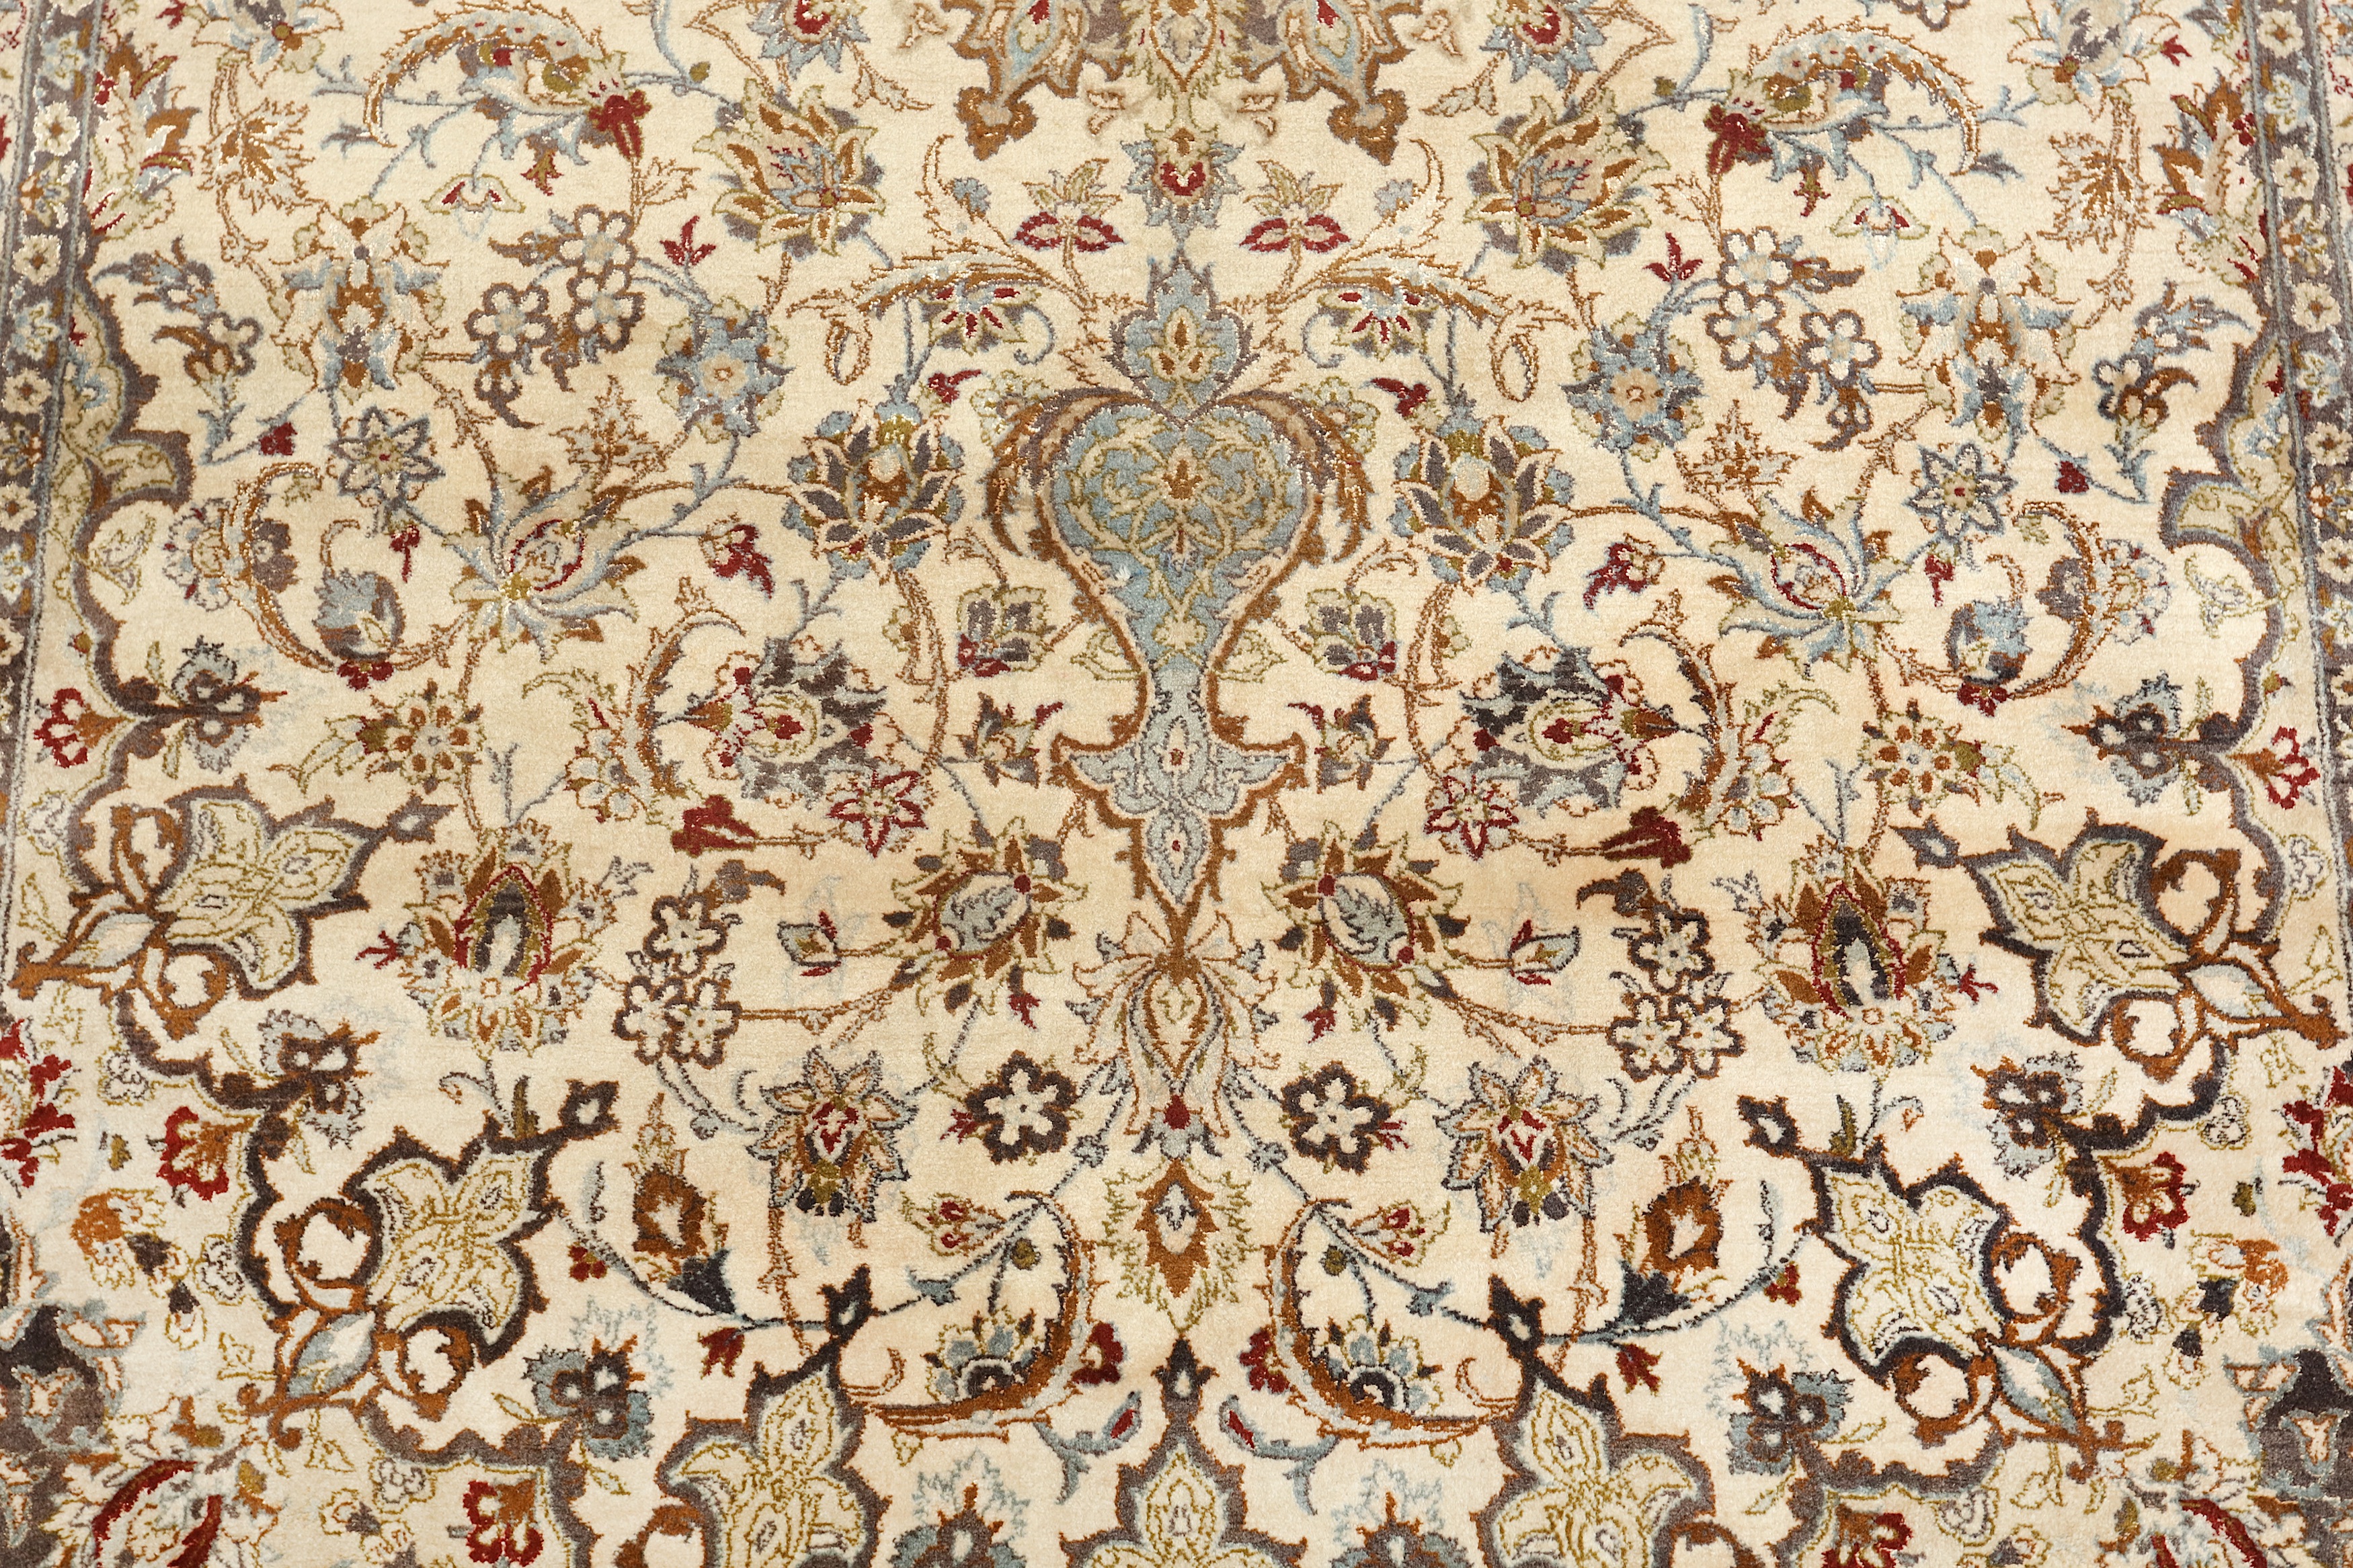 VERY FINE PART SILK ISFAHAN RUG, CENTRAL PERSIA - Image 4 of 8